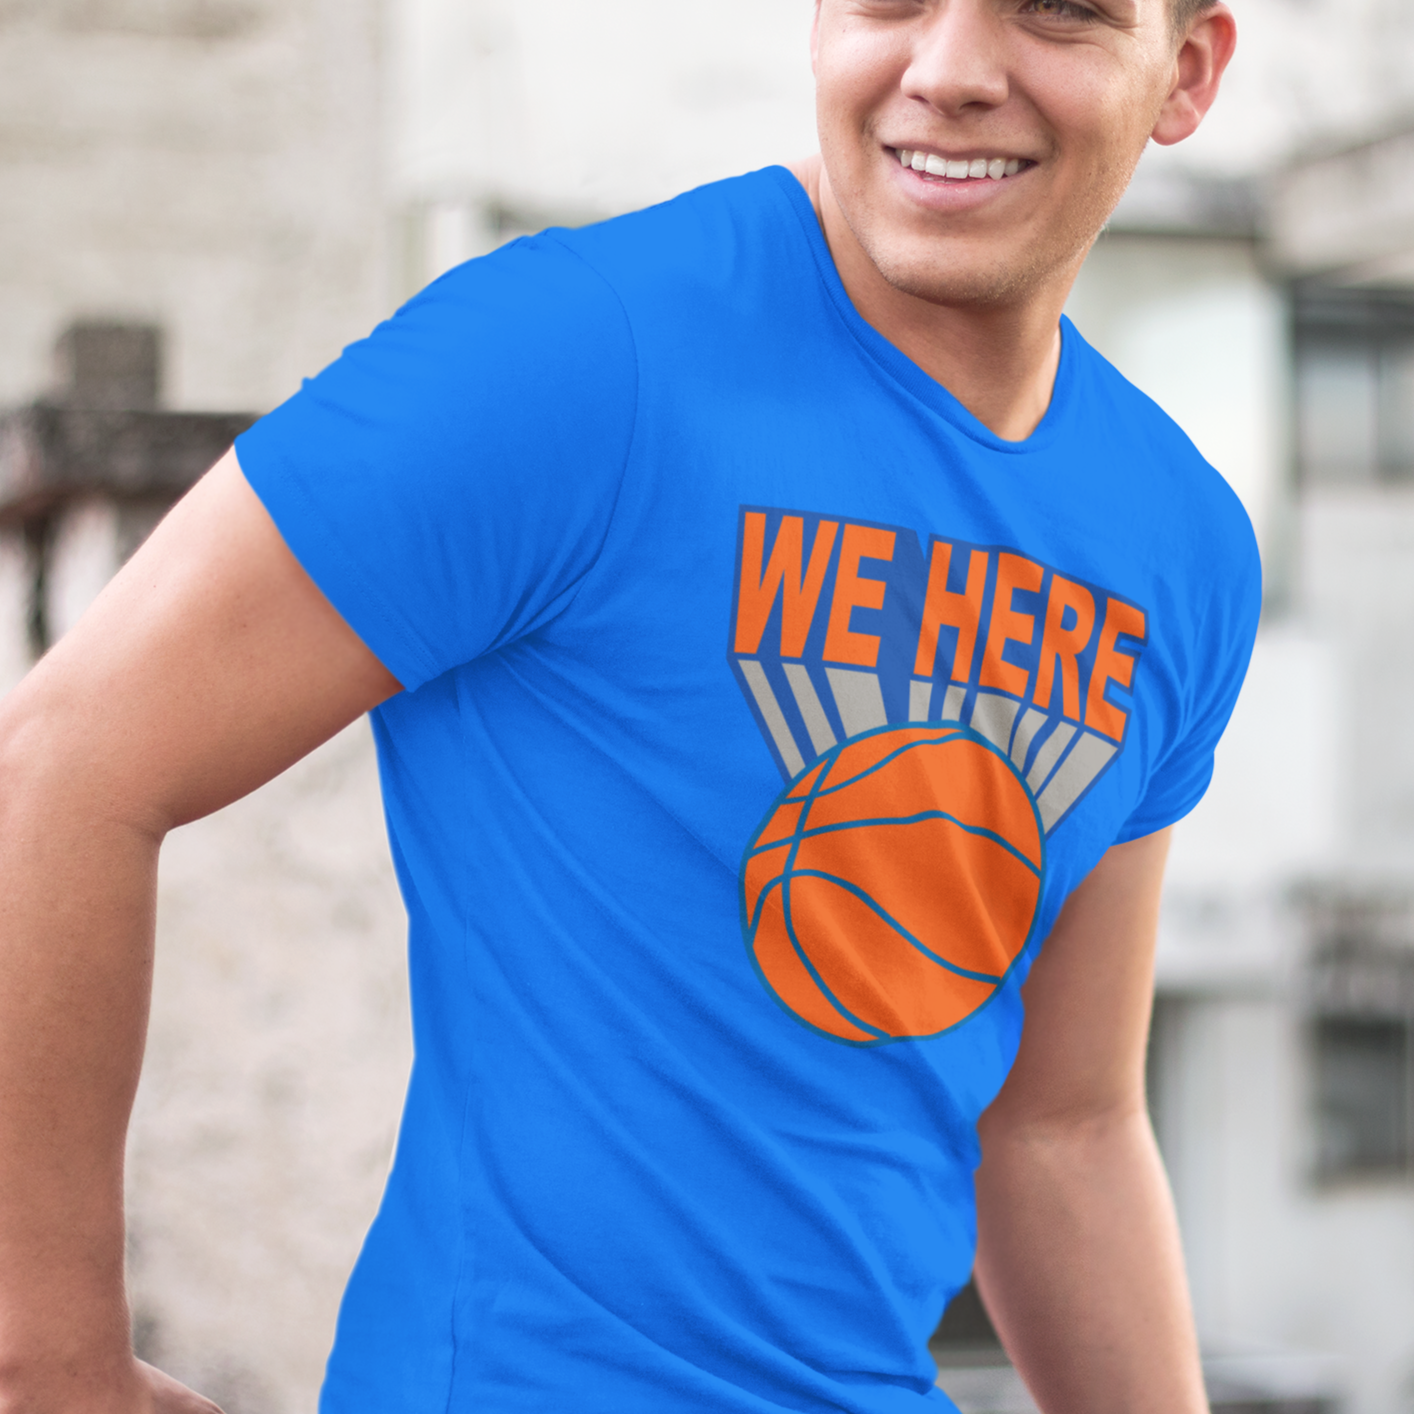 We Here - Unisex T-Shirt - Soft Cotton Blend, Classic Fit for Ultimate Comfort